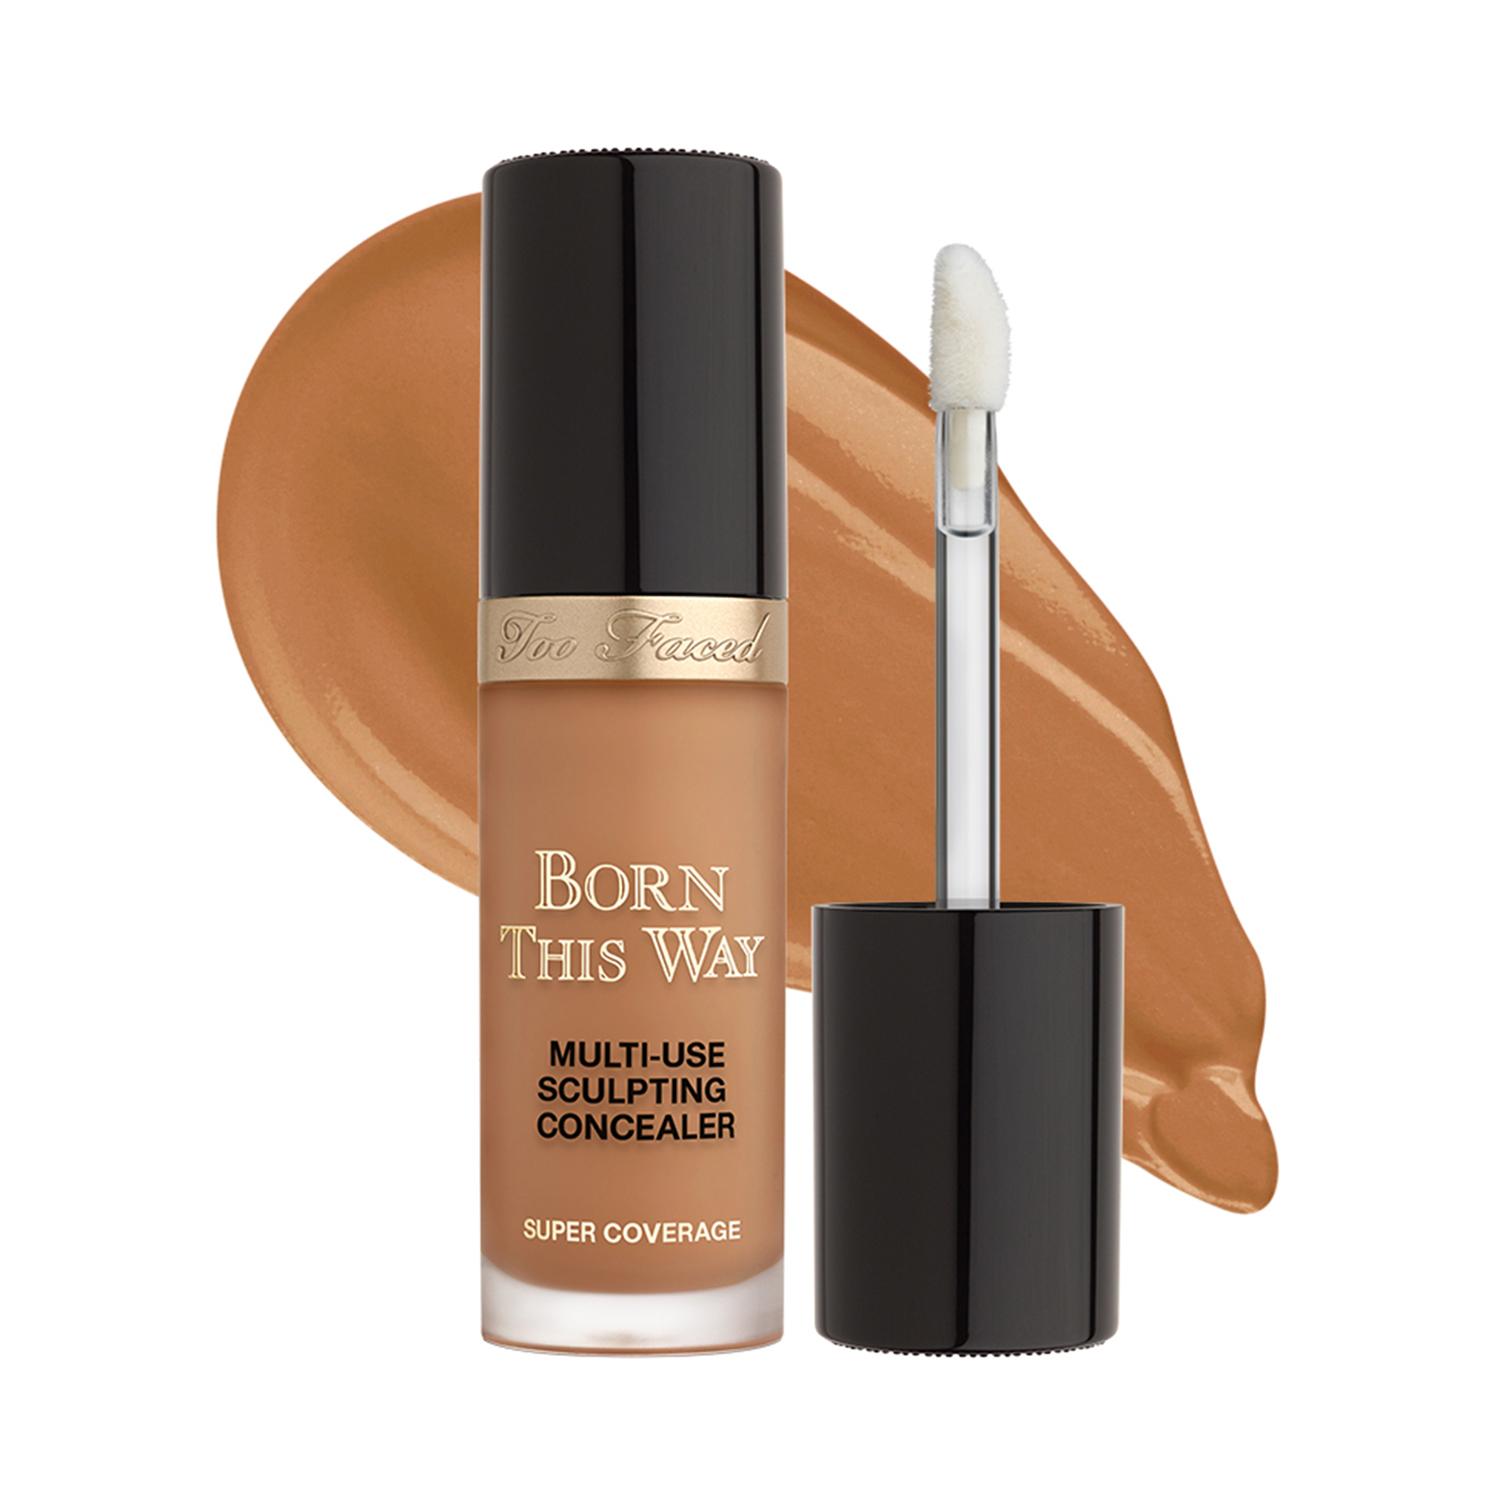 Too Faced | Too Faced Born This Way Super Coverage Multi Use Sculpting Concealer - Caramel (13.5ml)